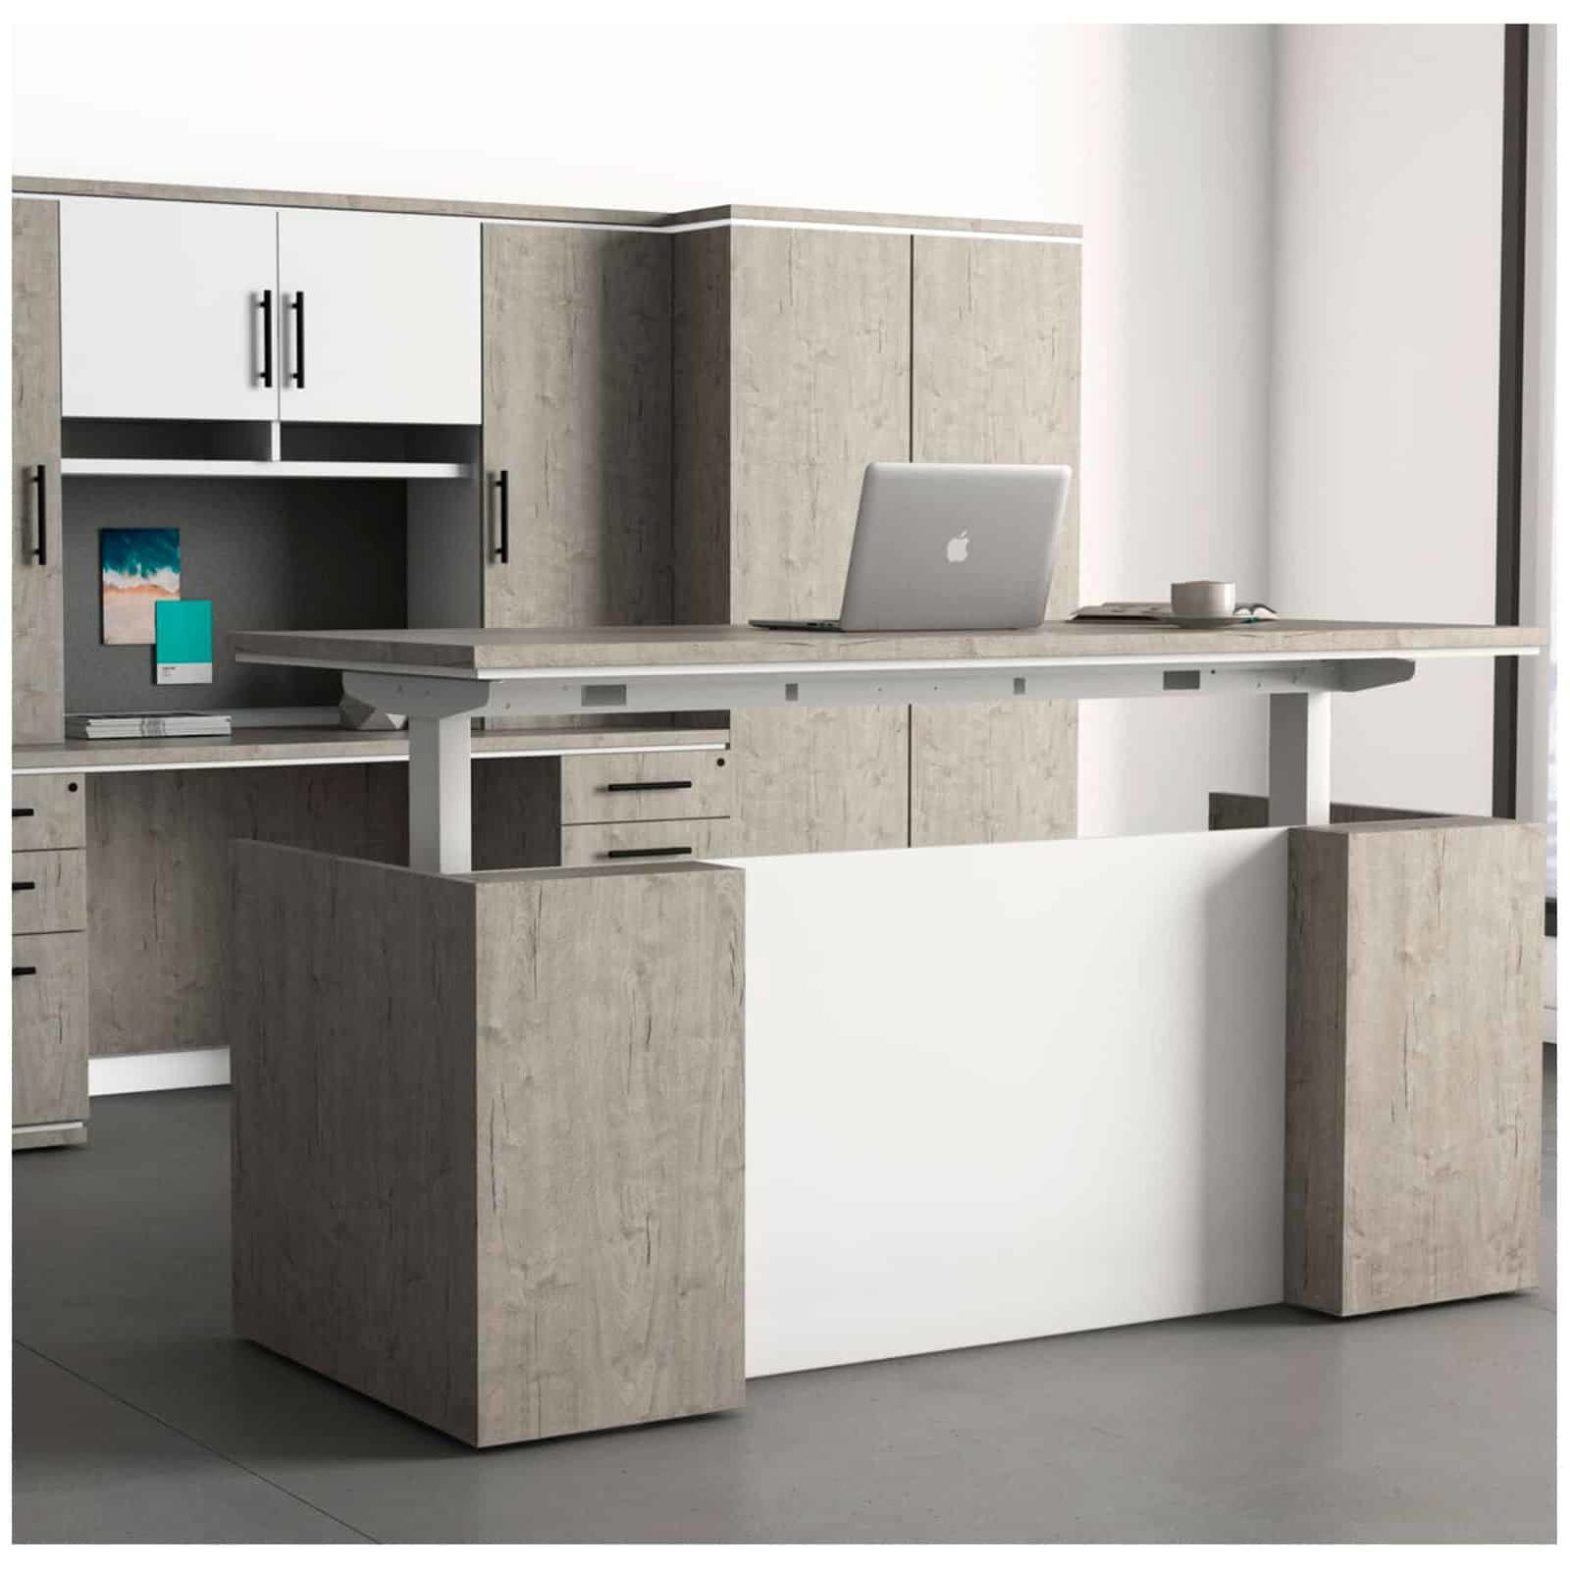 Deskmakers' Milano Series Stand Up Desk